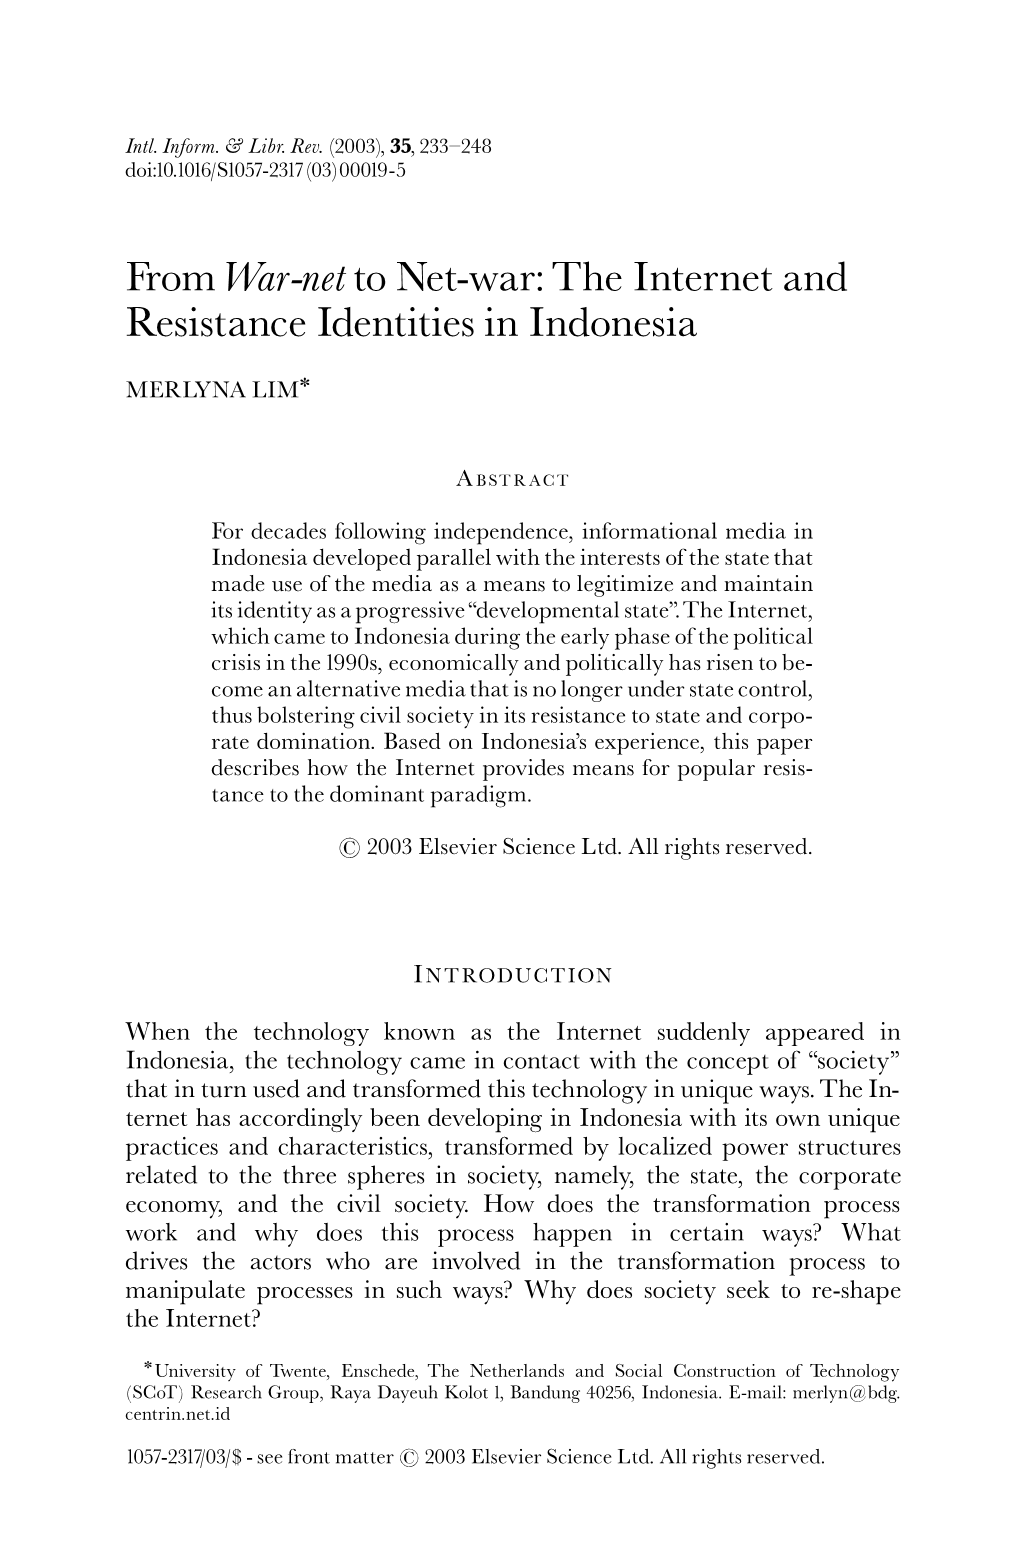 Fromwar-Netto Net-War: the Internet and Resistance Identities in Indonesia